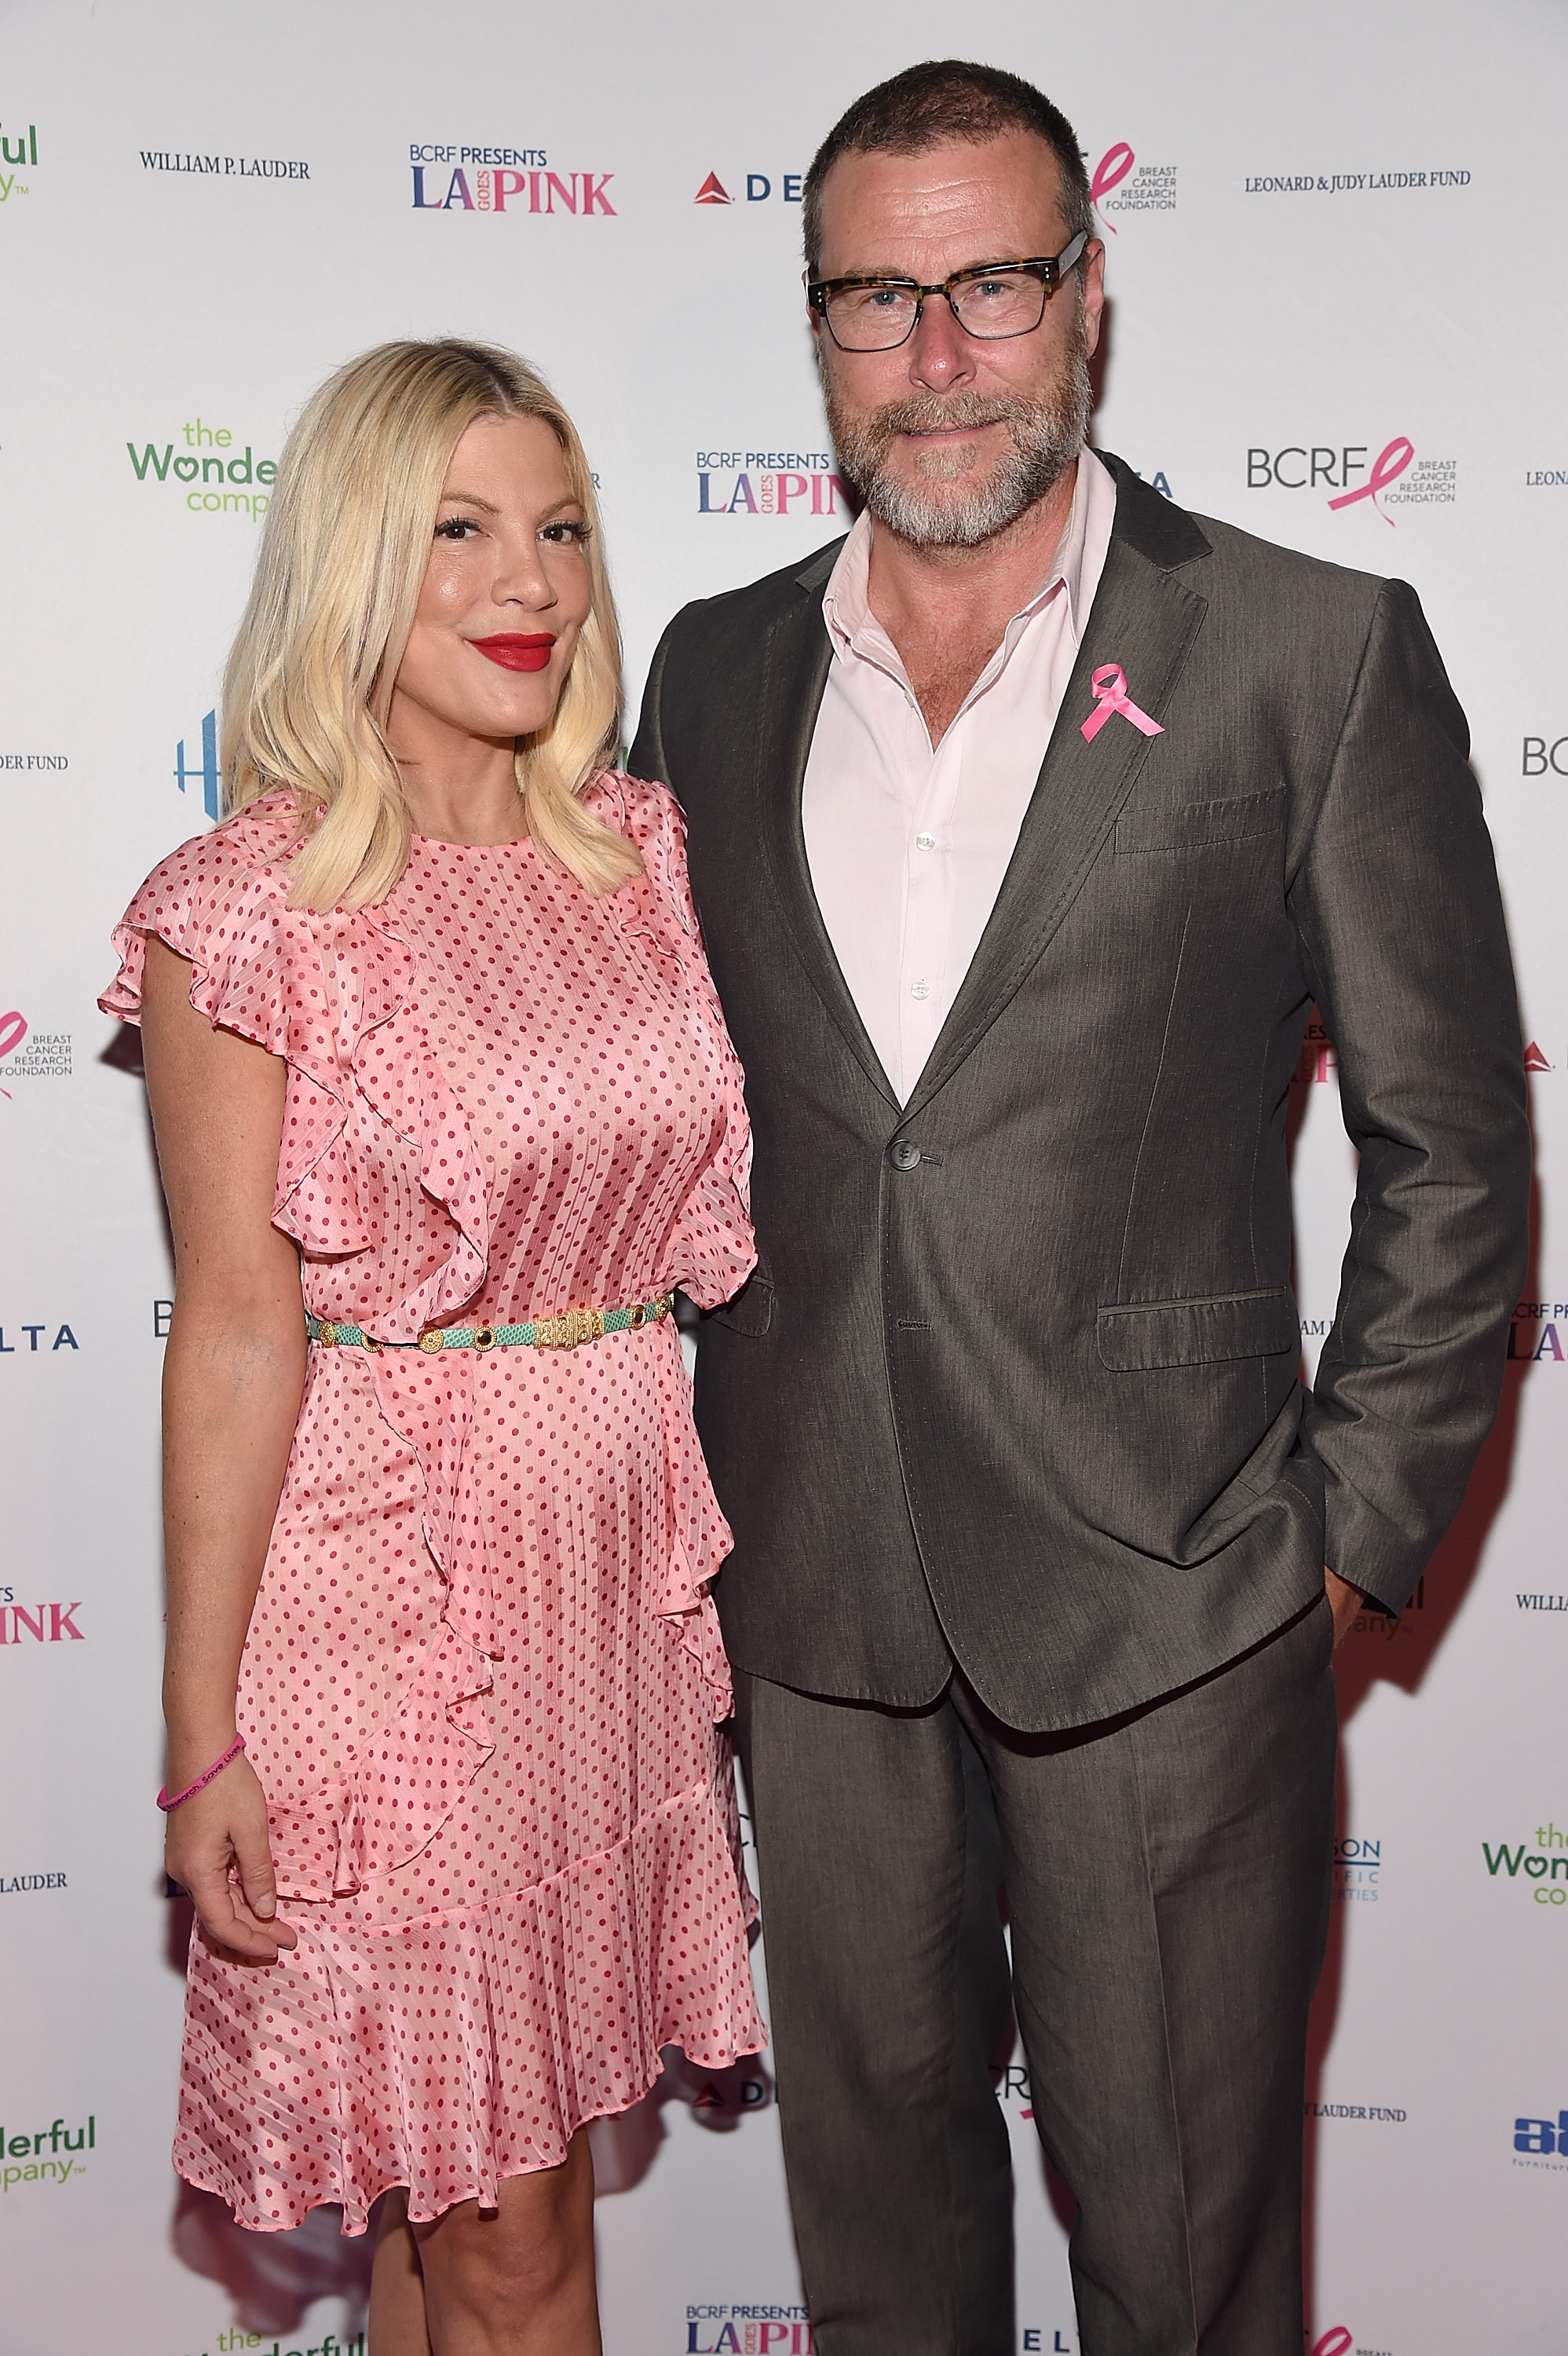 Tori Spelling and Dean McDermott attend BCRF Presents LA GOES PINK in Beverly Hills, California, on October 3, 2018. | Source: Getty Images